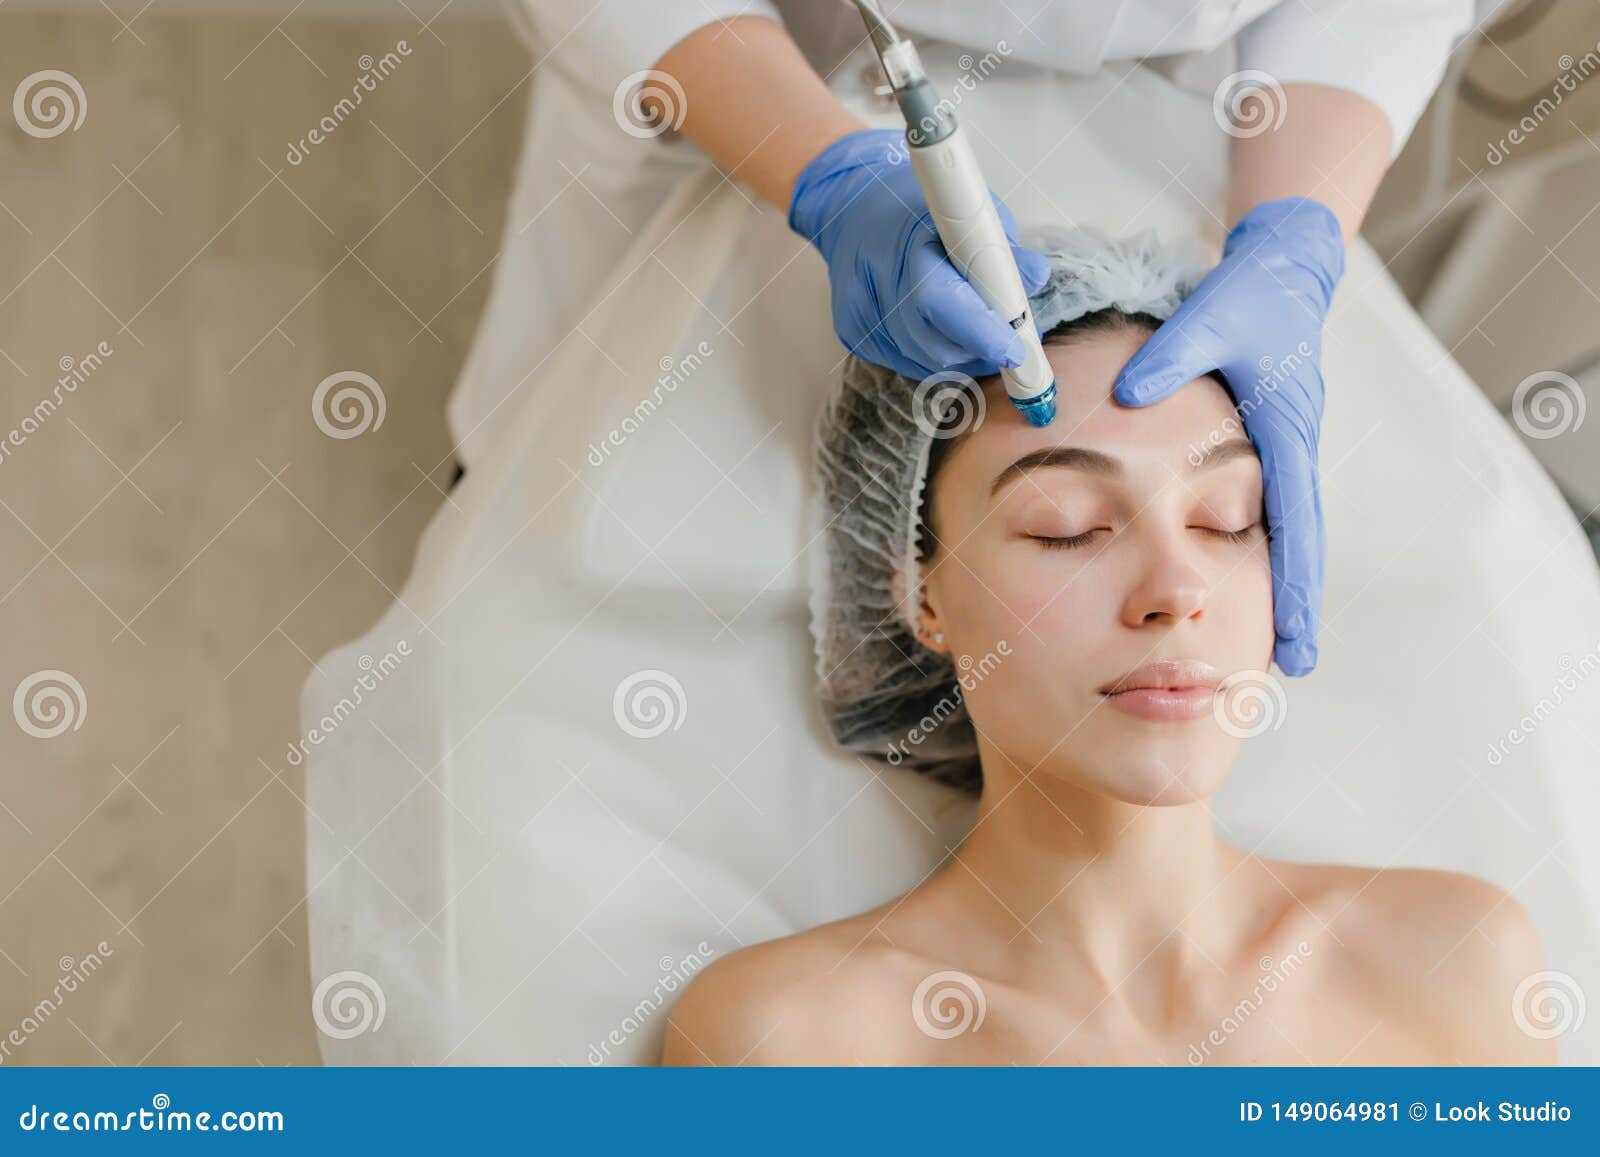 view from above of beautiful woman enjoying cosmetology procedures, rejuvenation in beauty salon. dermatology, doctor at